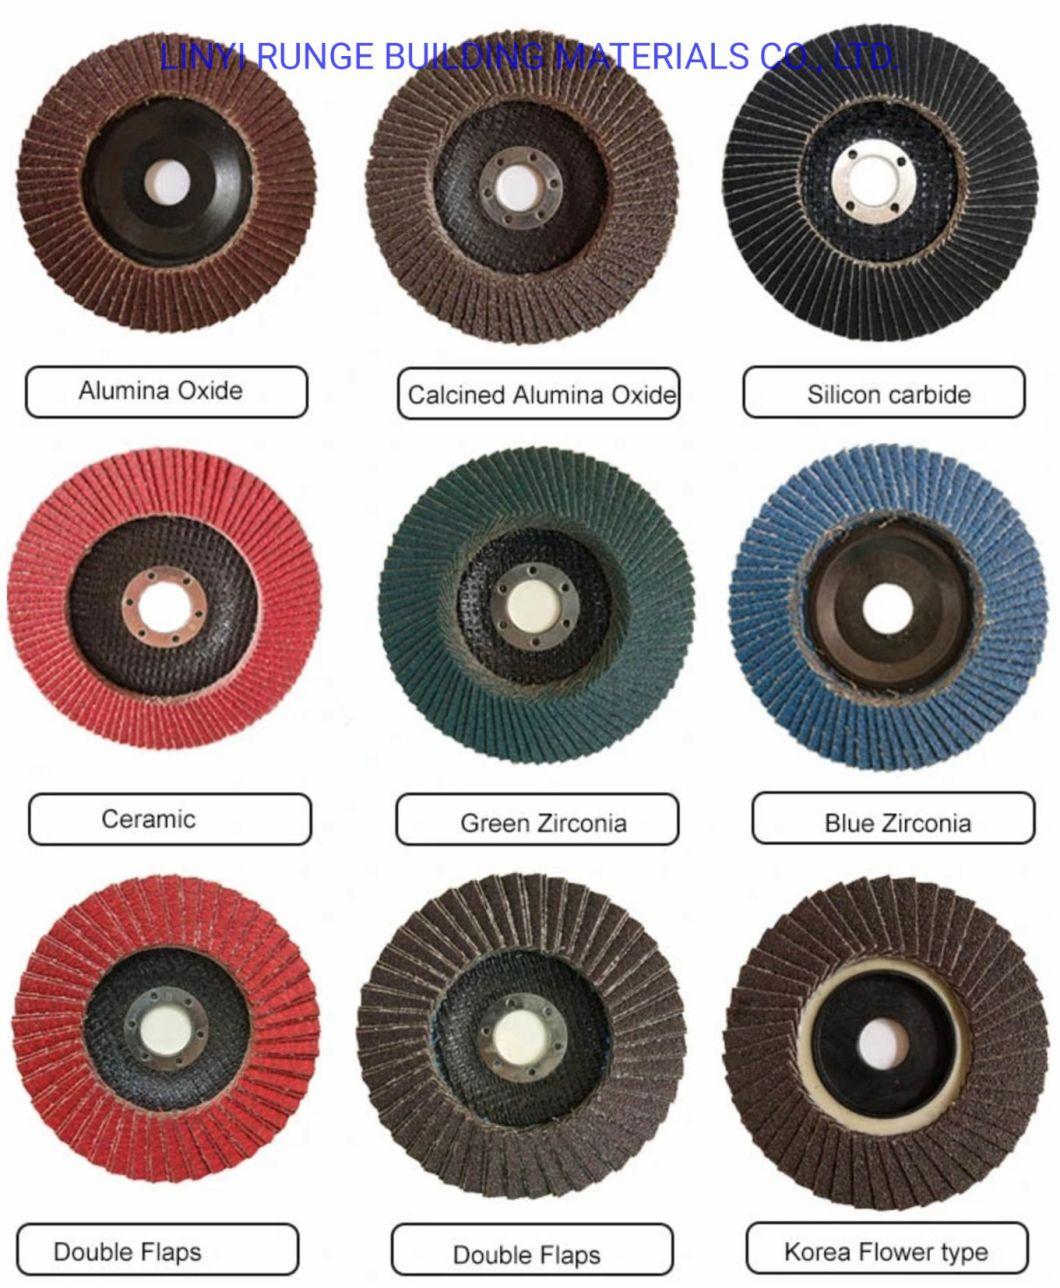 Abrasives 4.5" X 7/8" Ceramic Flat Flap Discs T27 for Stainless Steel and Heat Sensitive Metals (60 Grit) Power Tool